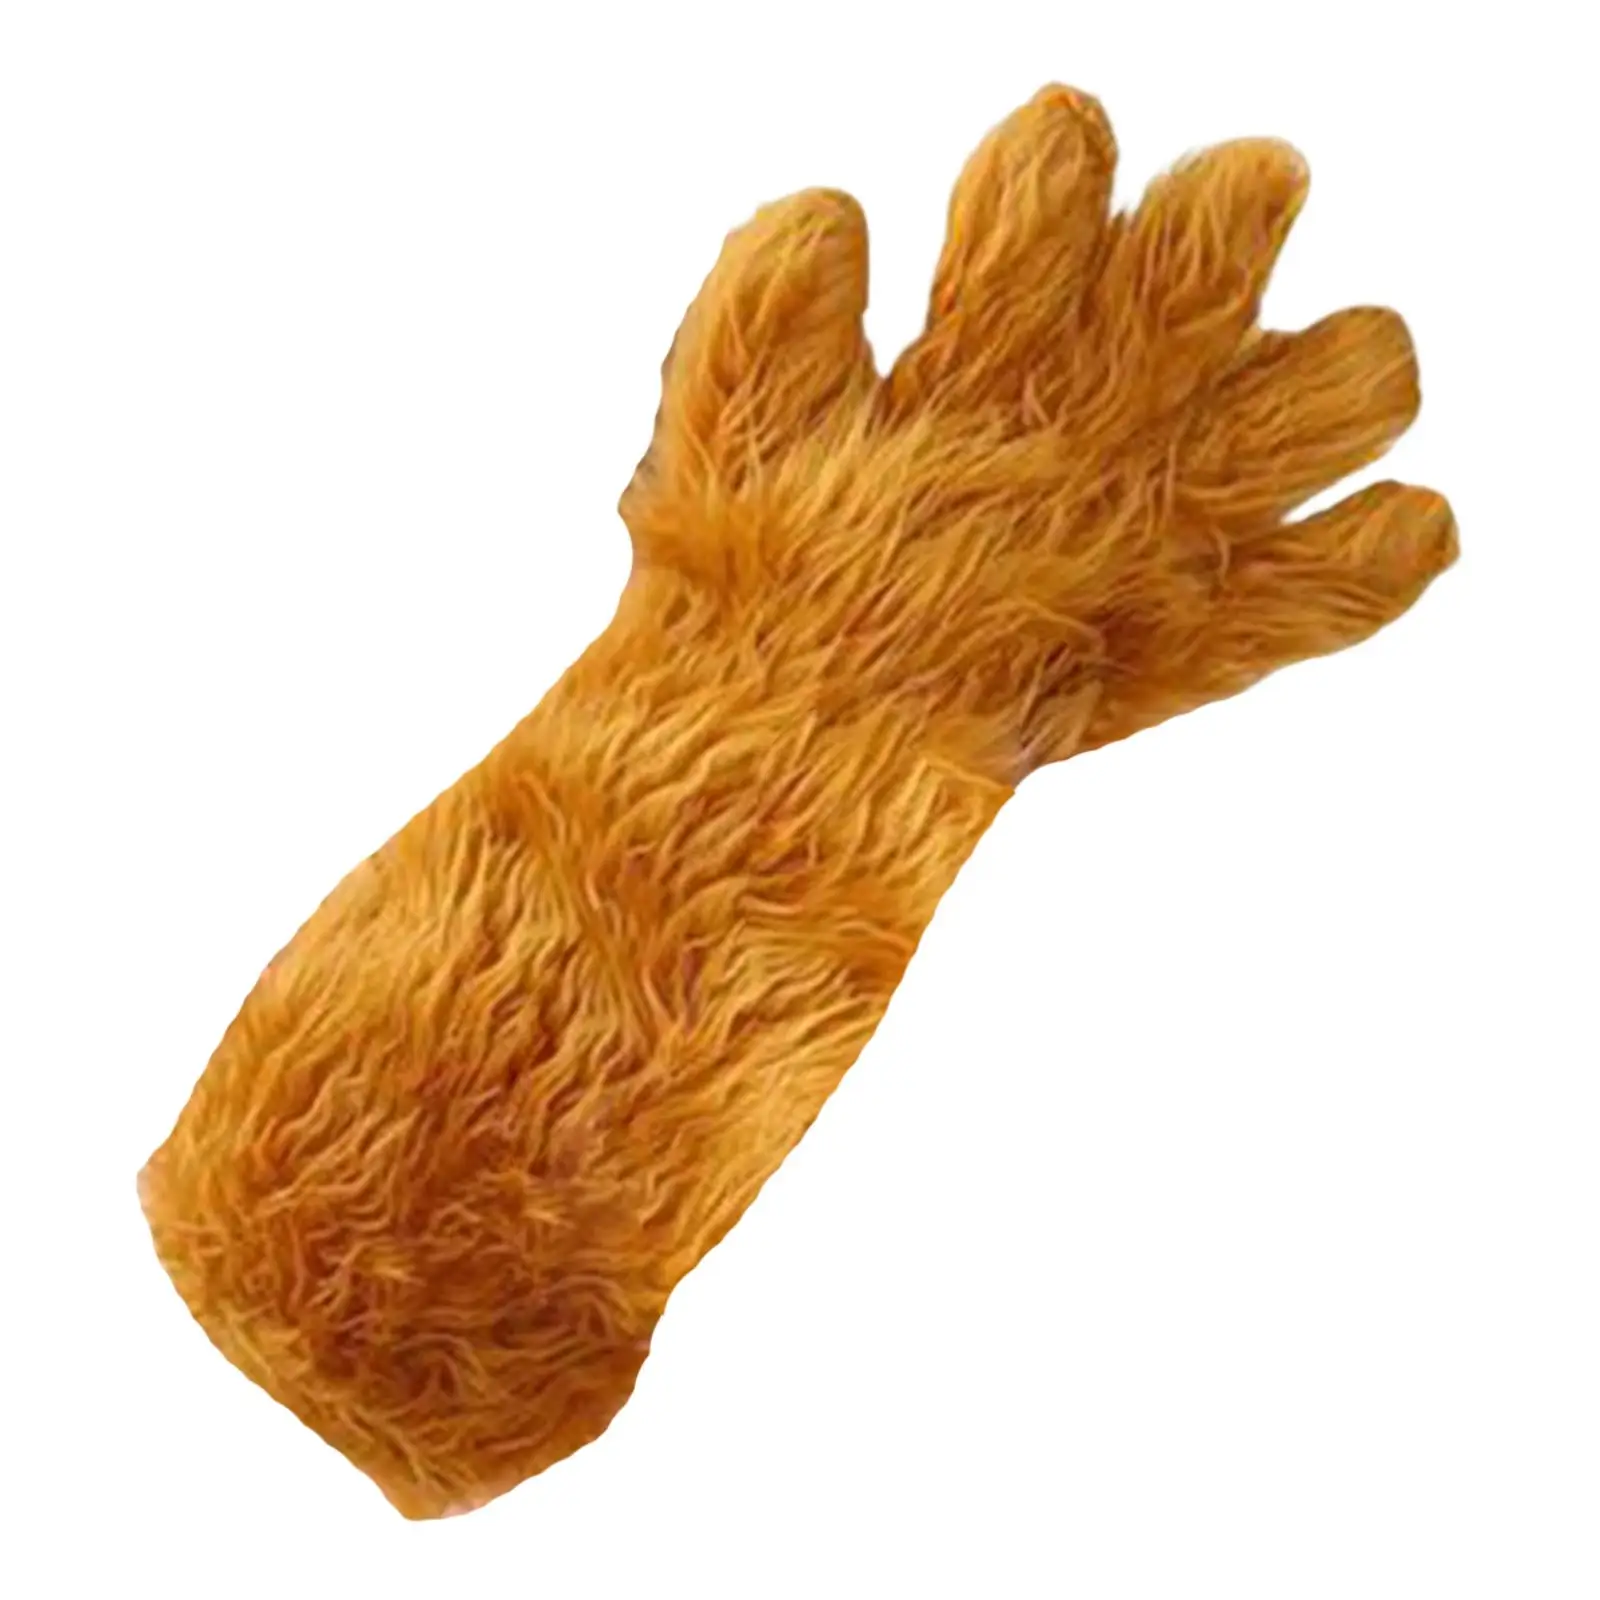 Plush Long Paw Gloves Costume Fancy Dress Adult Cosplay Gift Decoration for Festival Carnival Masquerade Party Halloween